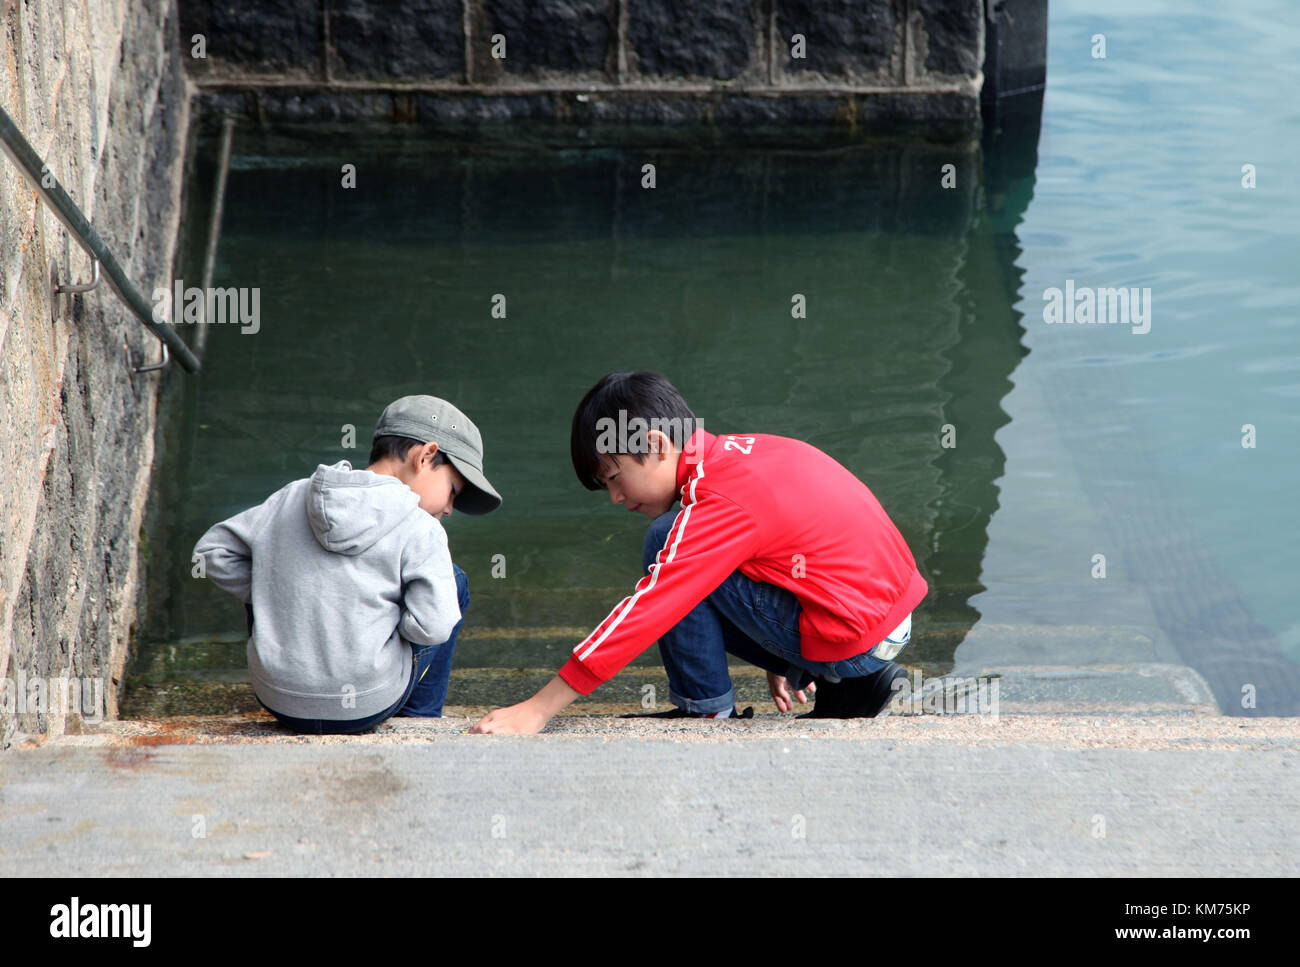 2 young boys playing near the water in a harbor Stock Photo